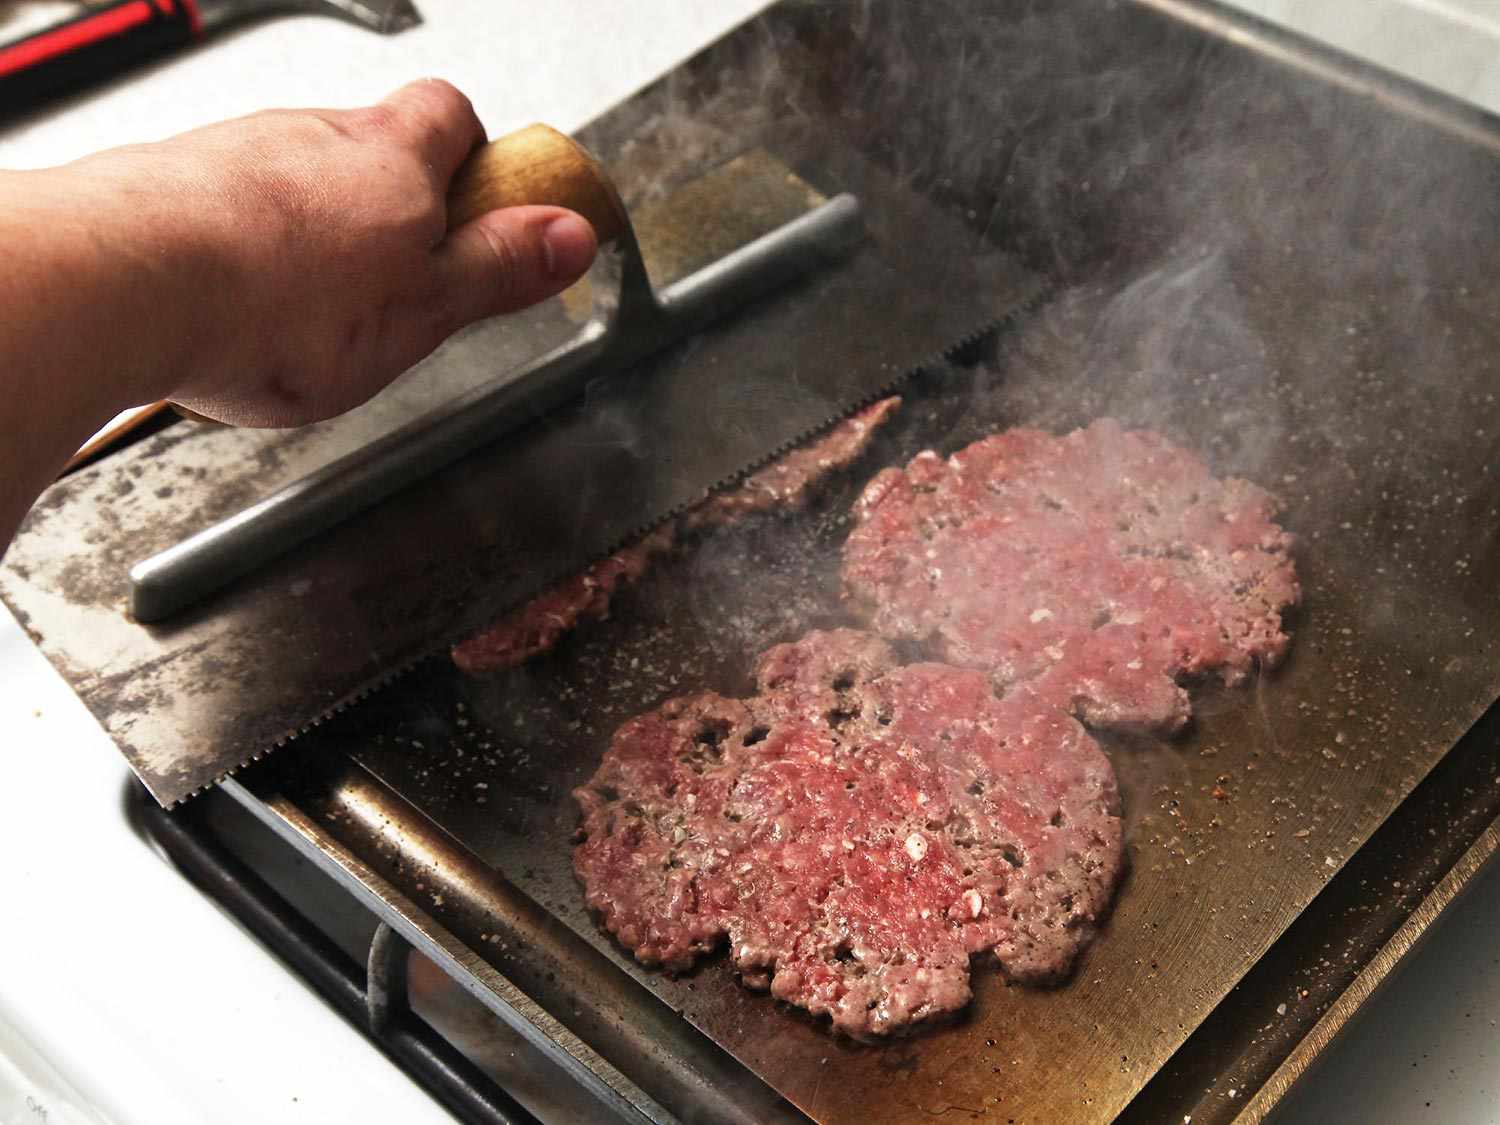 Pressing smashburgers on the baking steel griddle